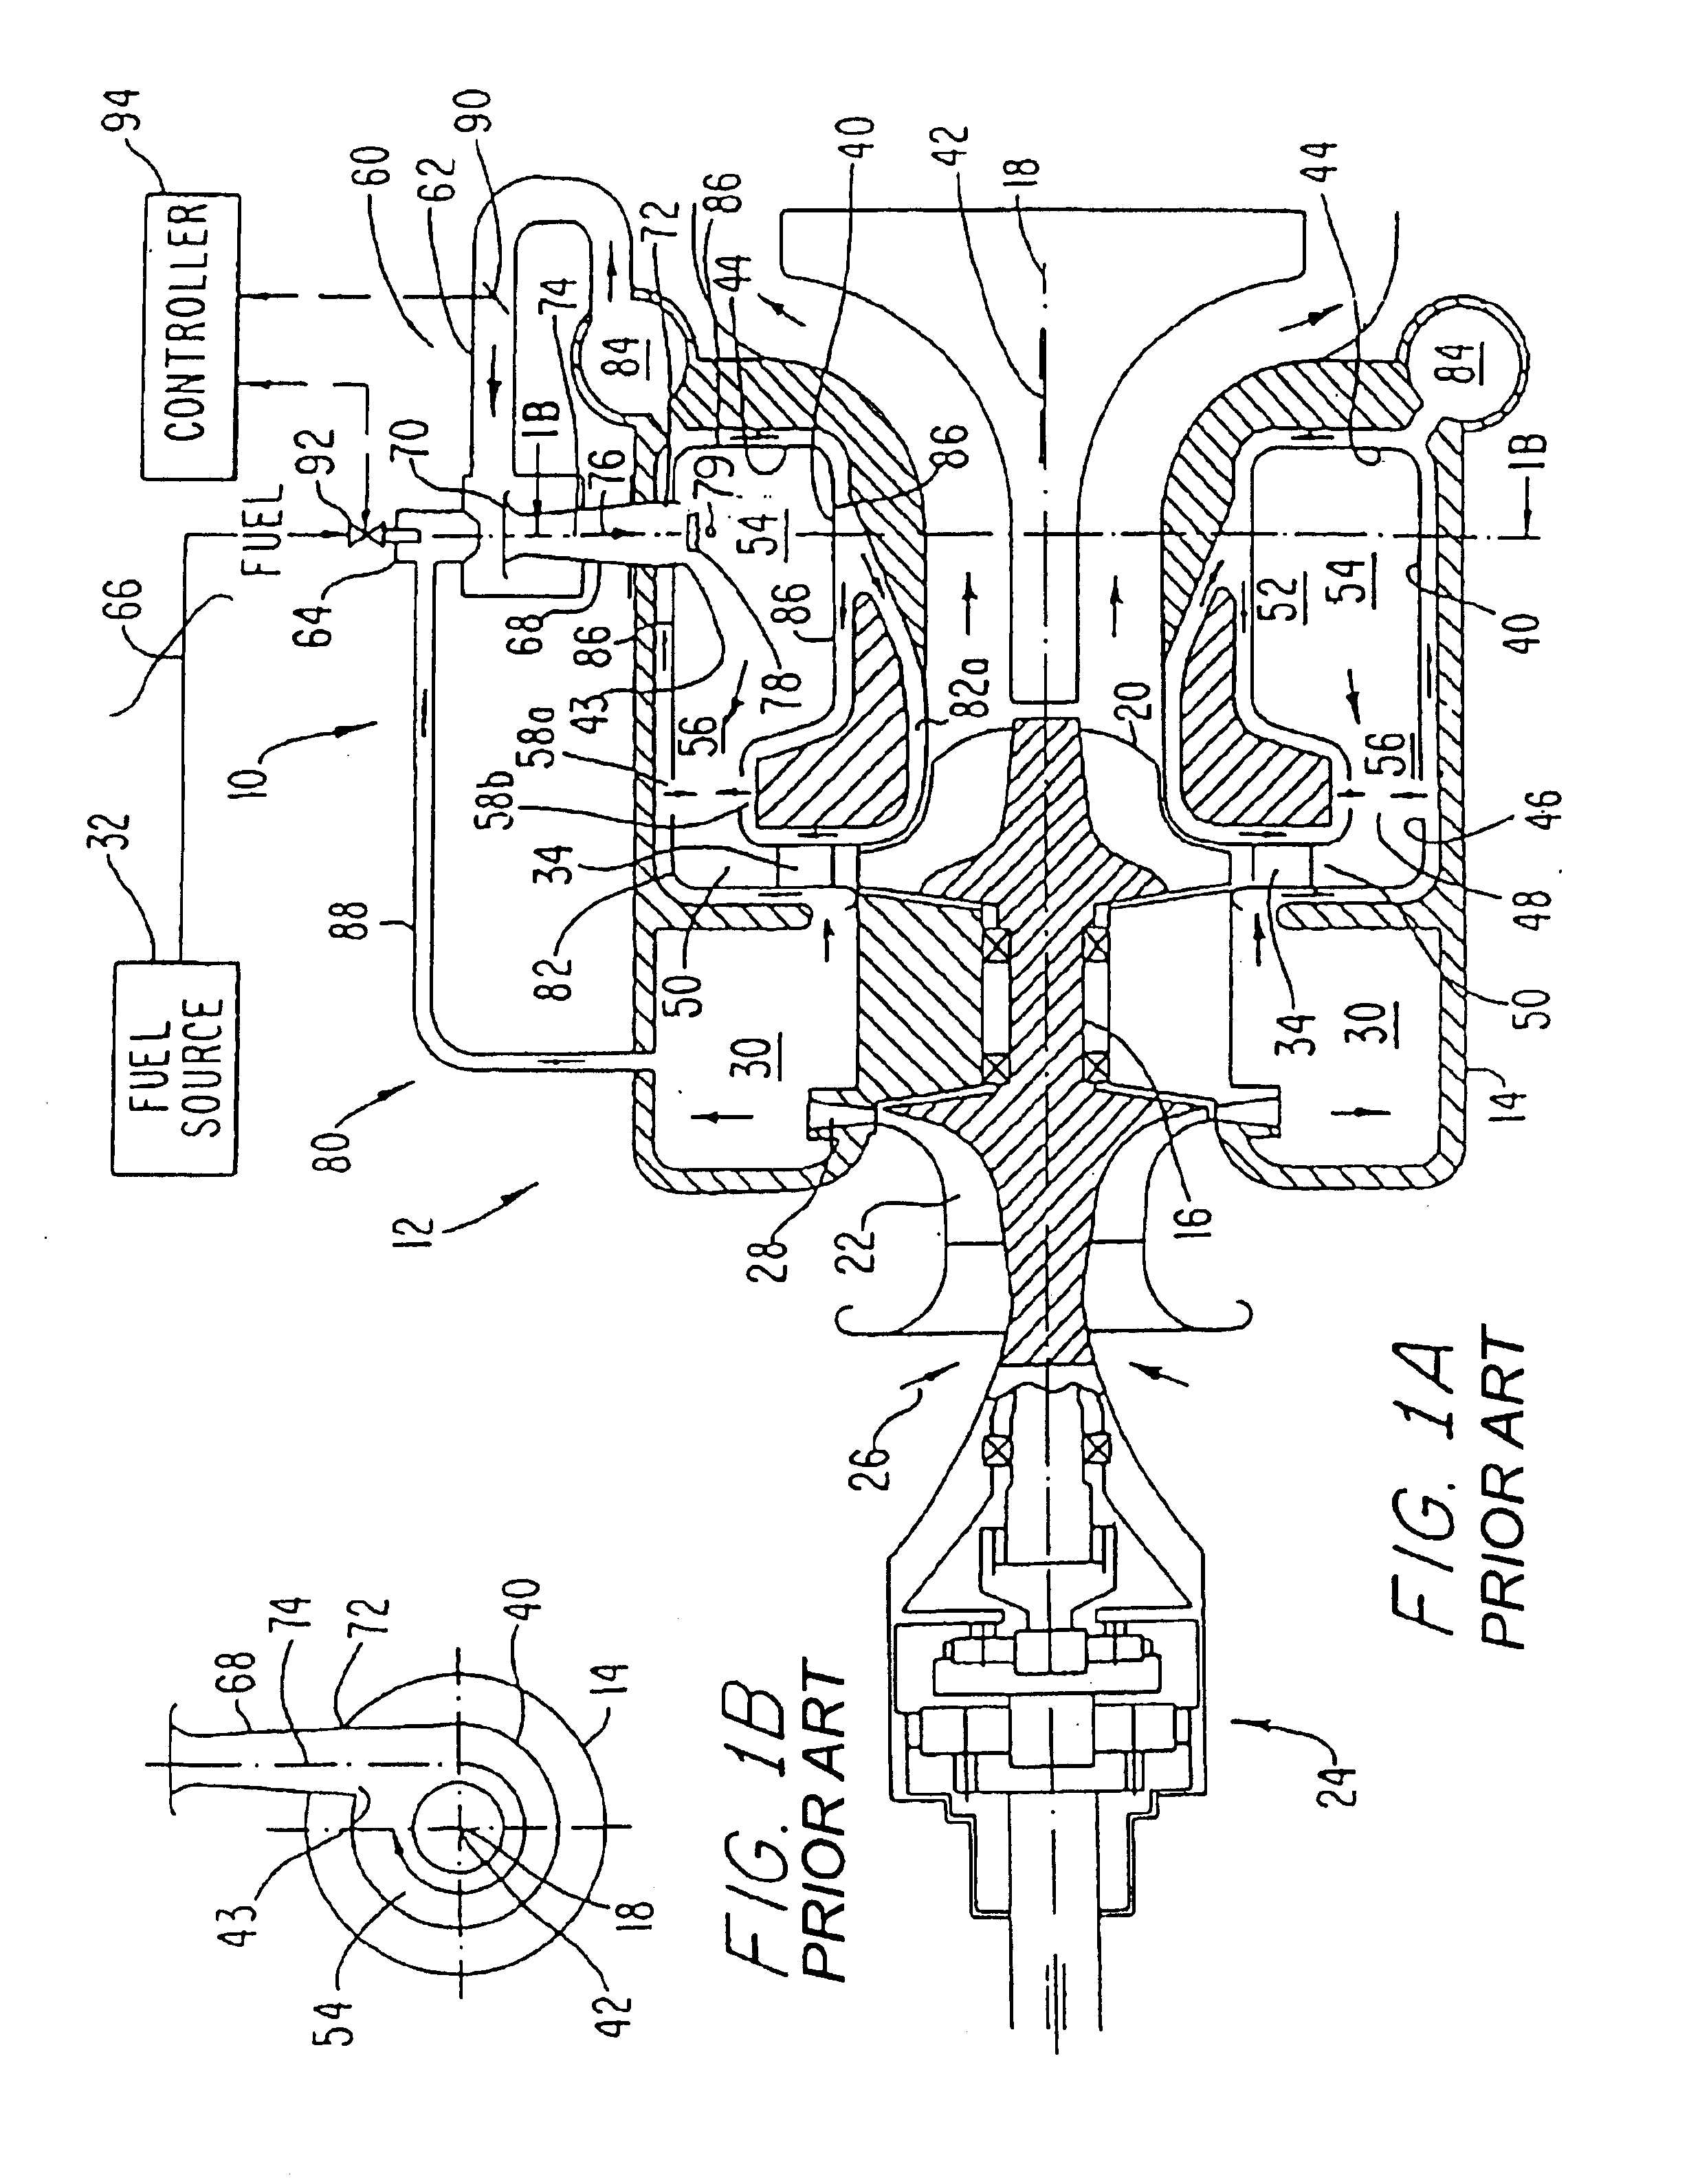 Gas turbine engine fuel/air premixers with variable geometry exit and method for controlling exit velocities